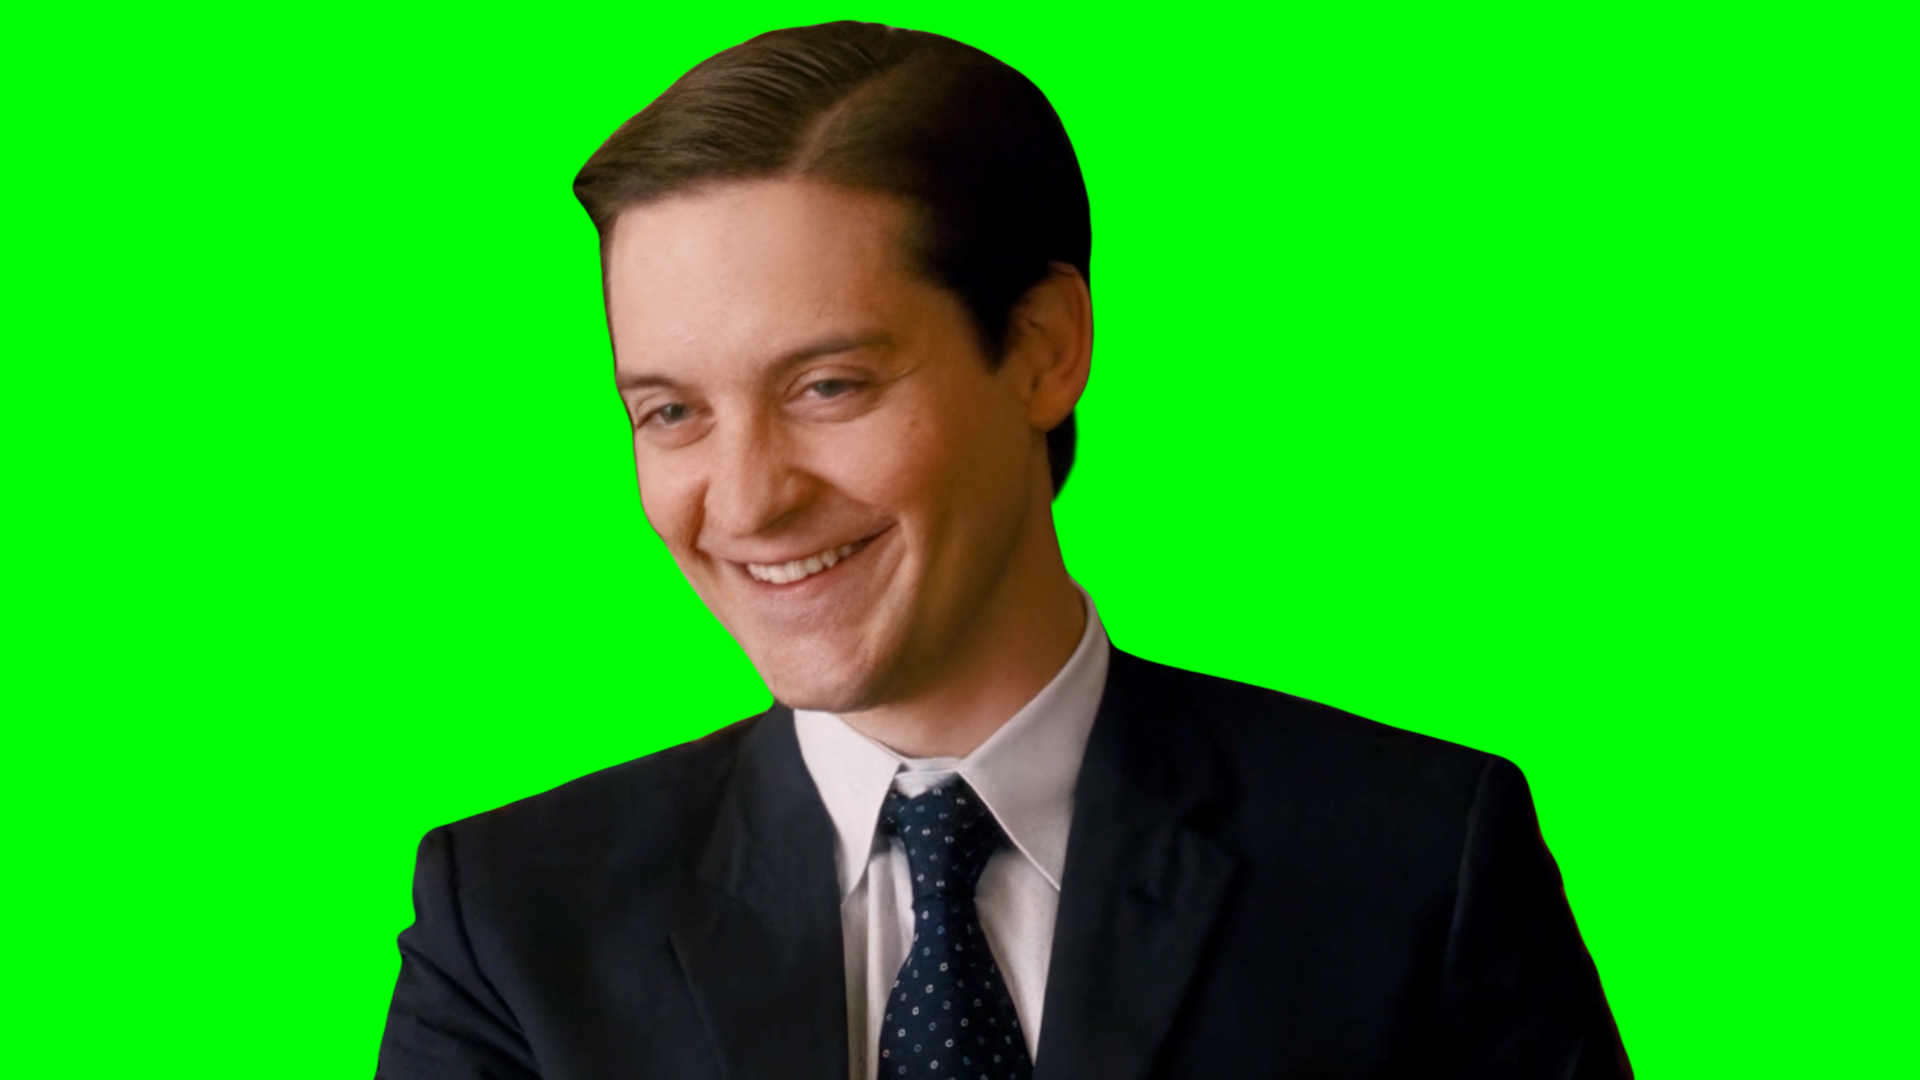 How'd that get in there? - Spider-Man 3 Tobey Maguire meme (Green Screen)